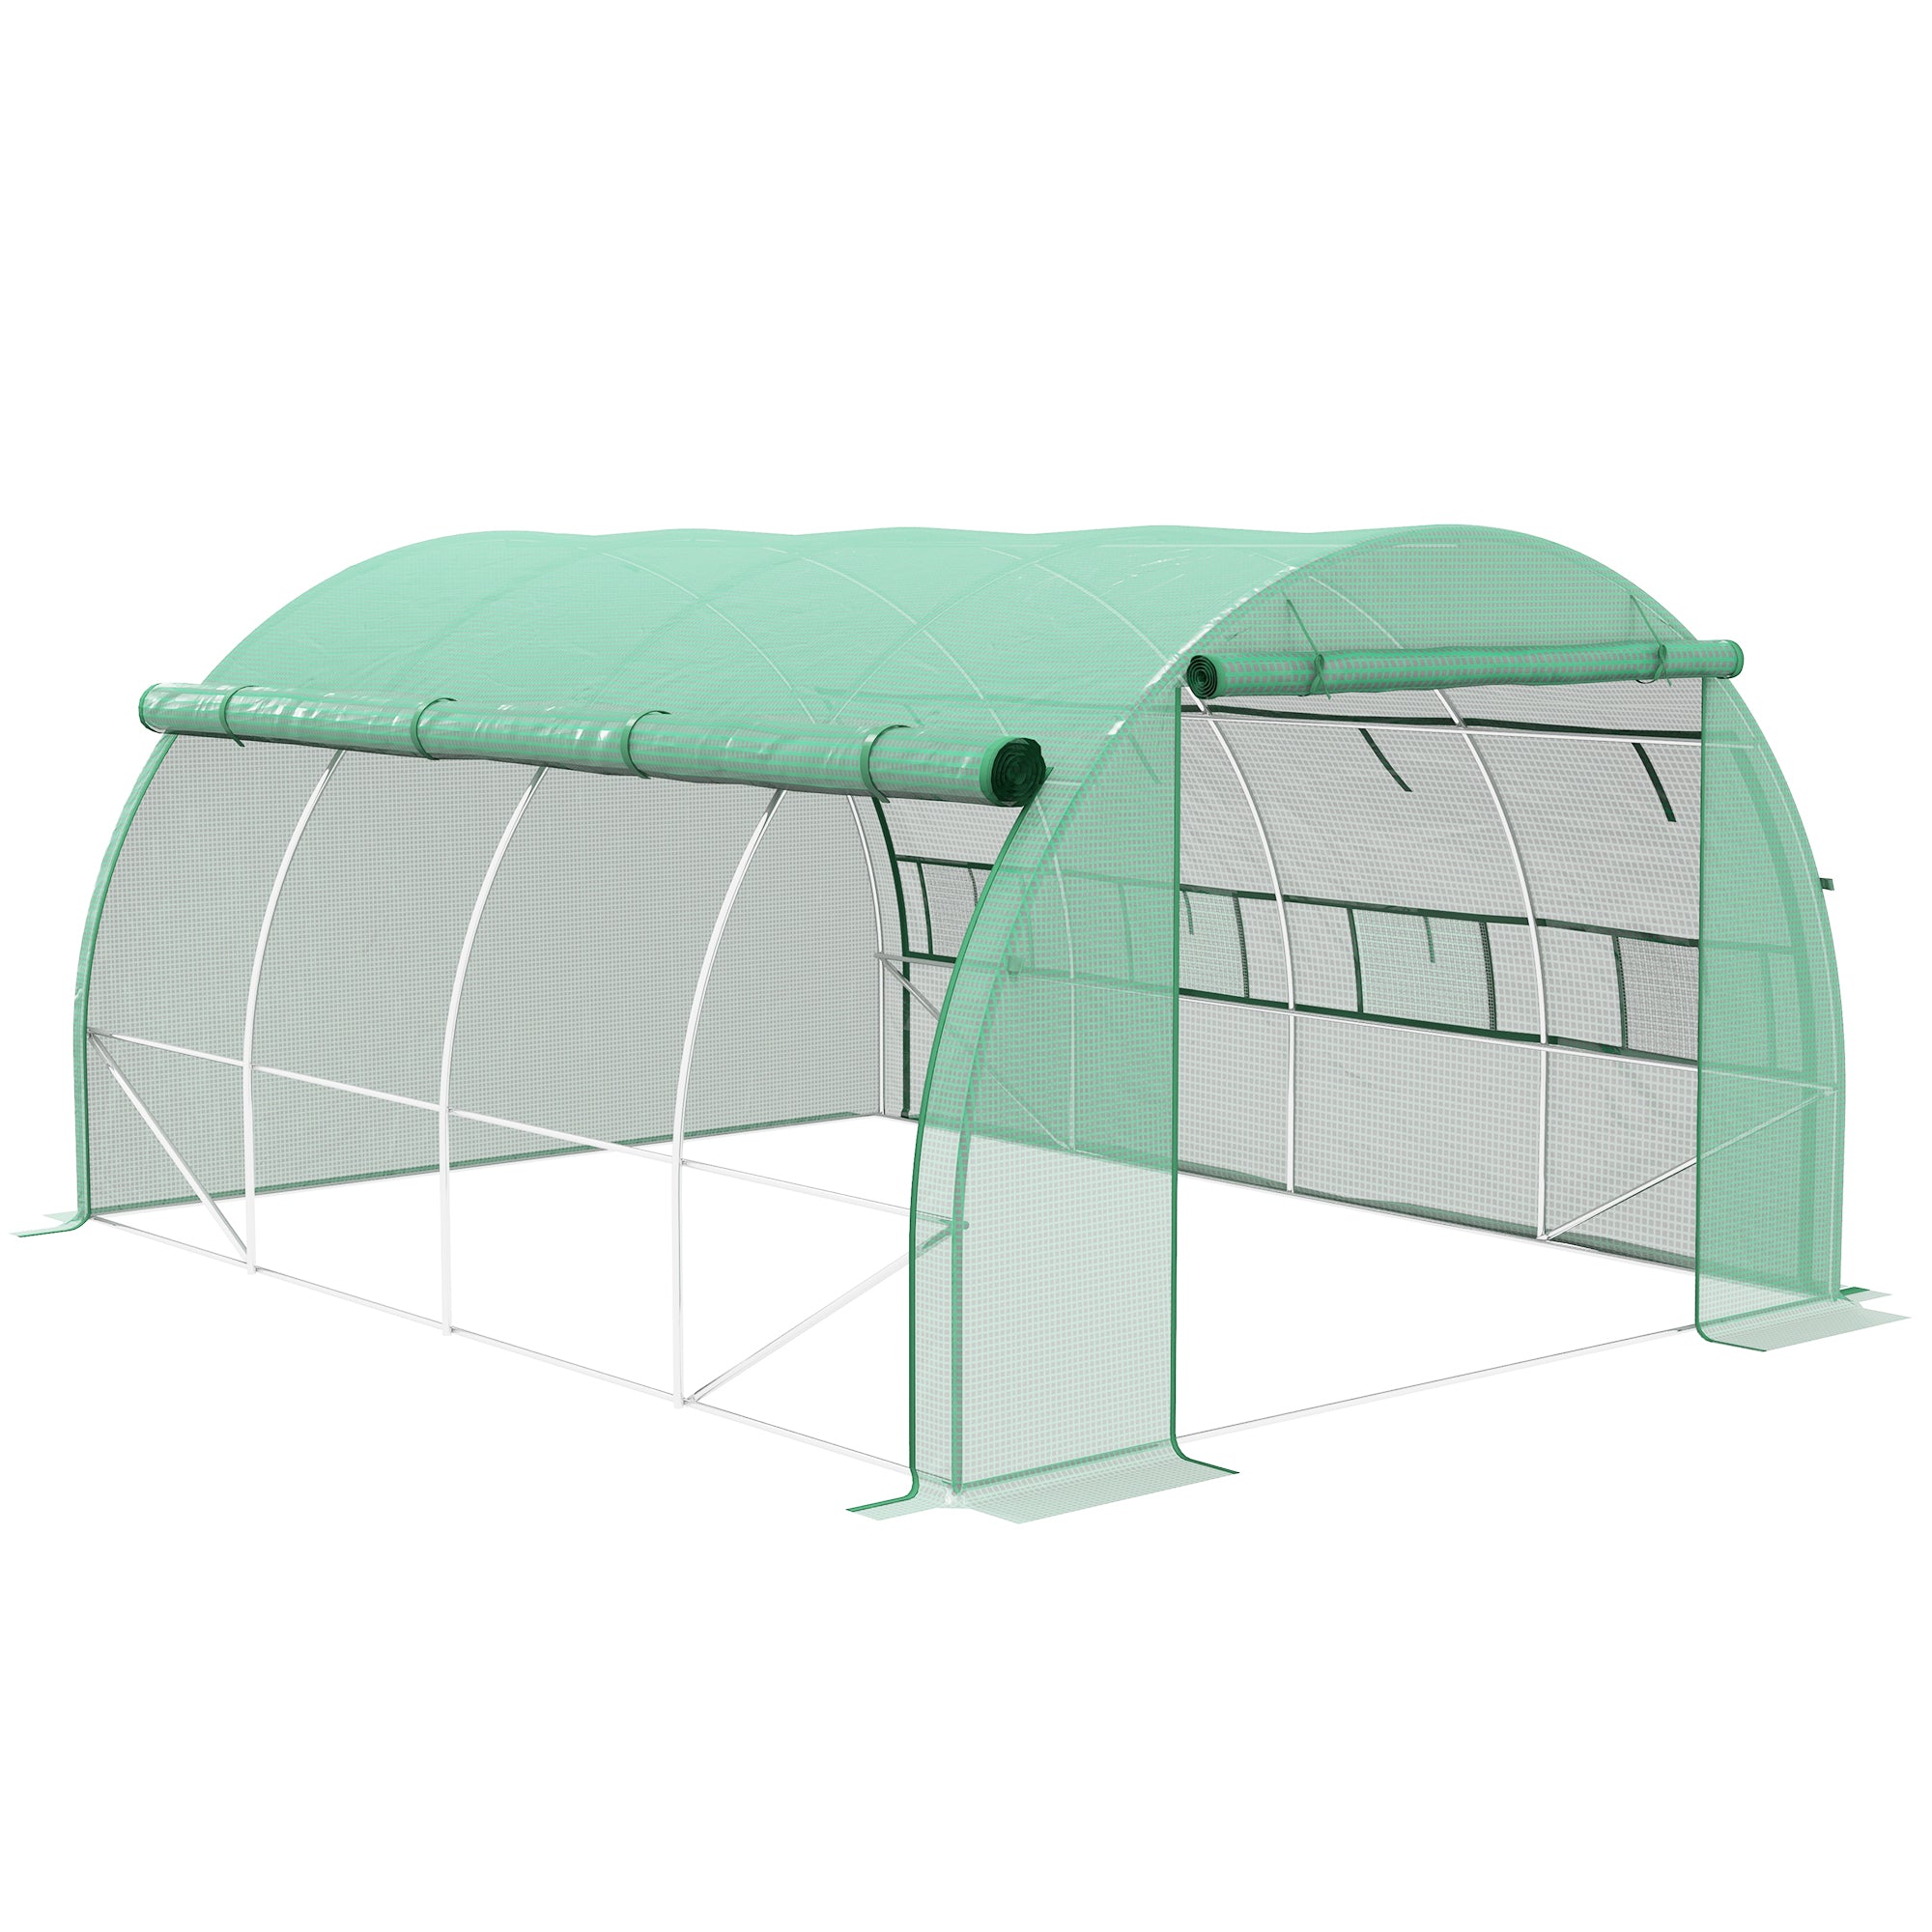 Outsunny 4 x 3 x 2 m Polytunnel Greenhouse Pollytunnel Tent Steel Frame Green  | TJ Hughes